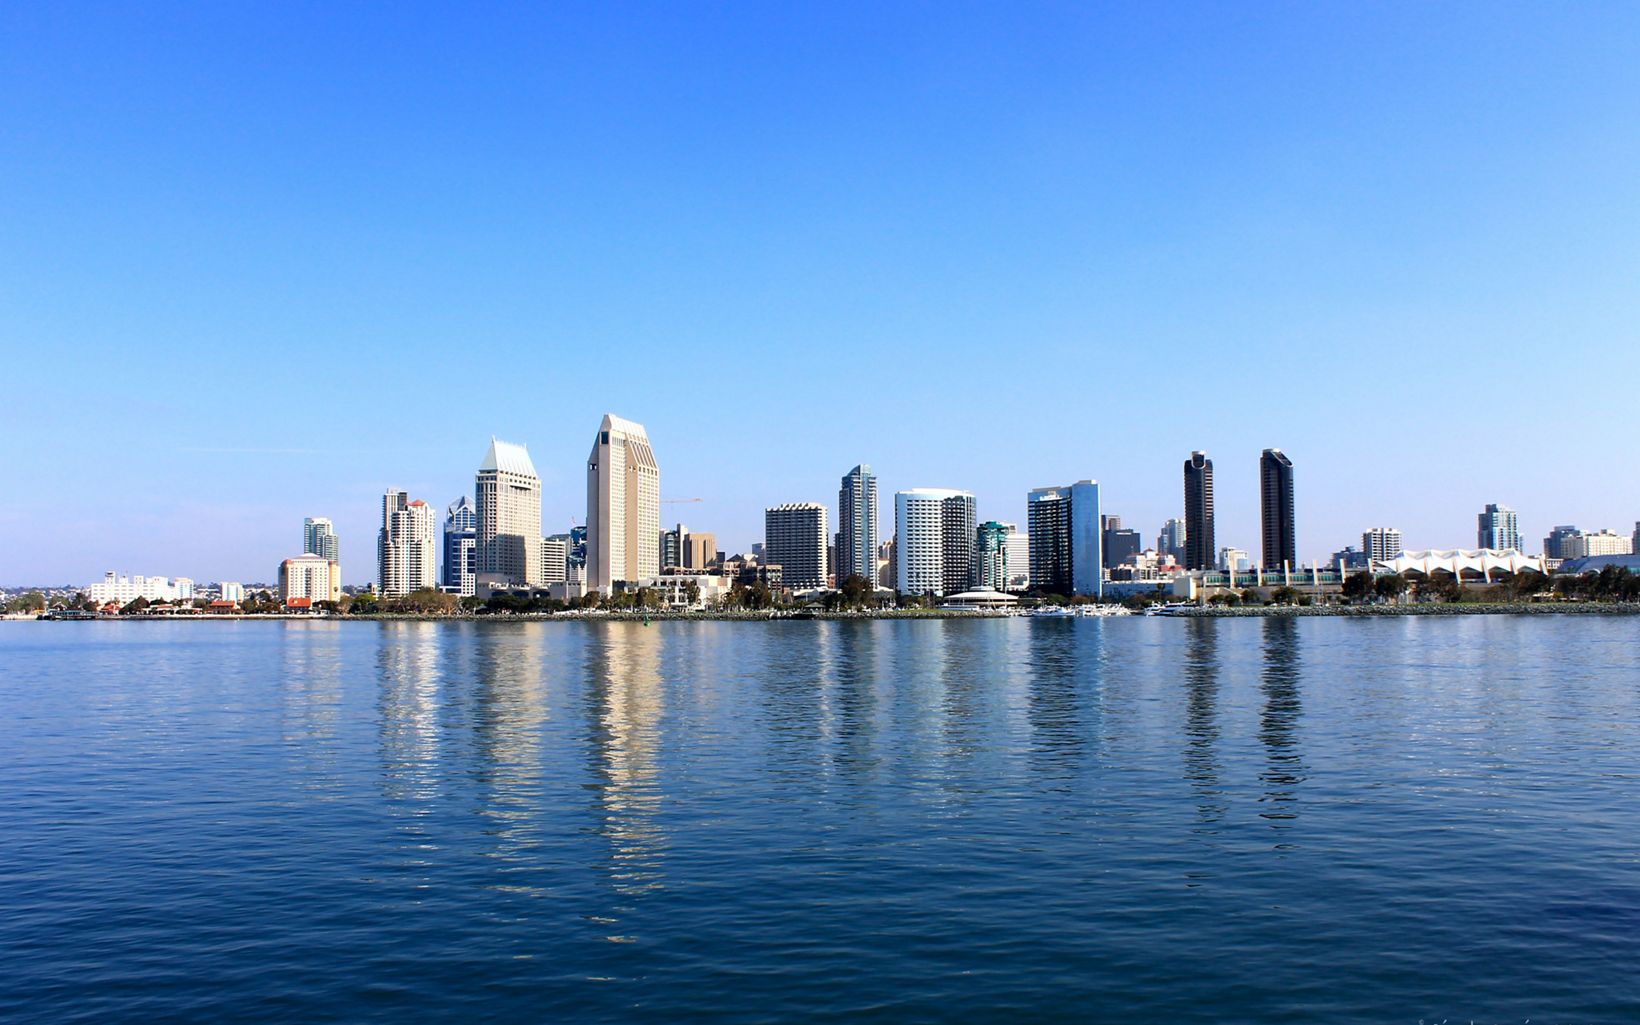 View of downtown San Diego from across the river.